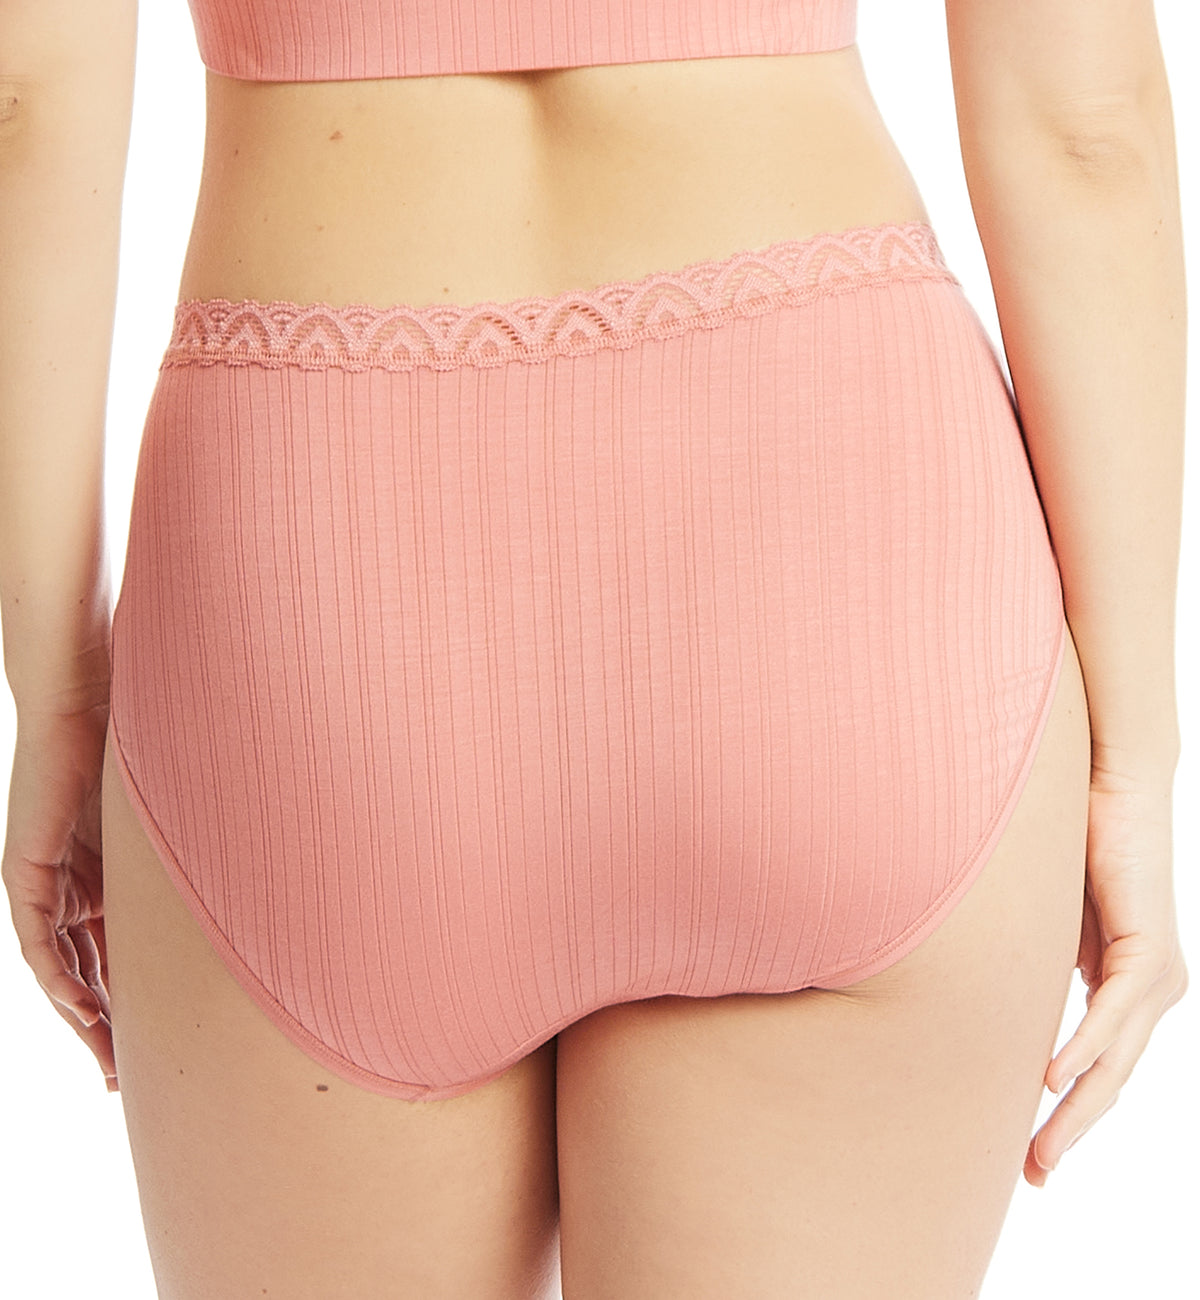 Hanky Panky MicroStripe French Brief (624612),XS,Antique Rose - Antique Rose,XS